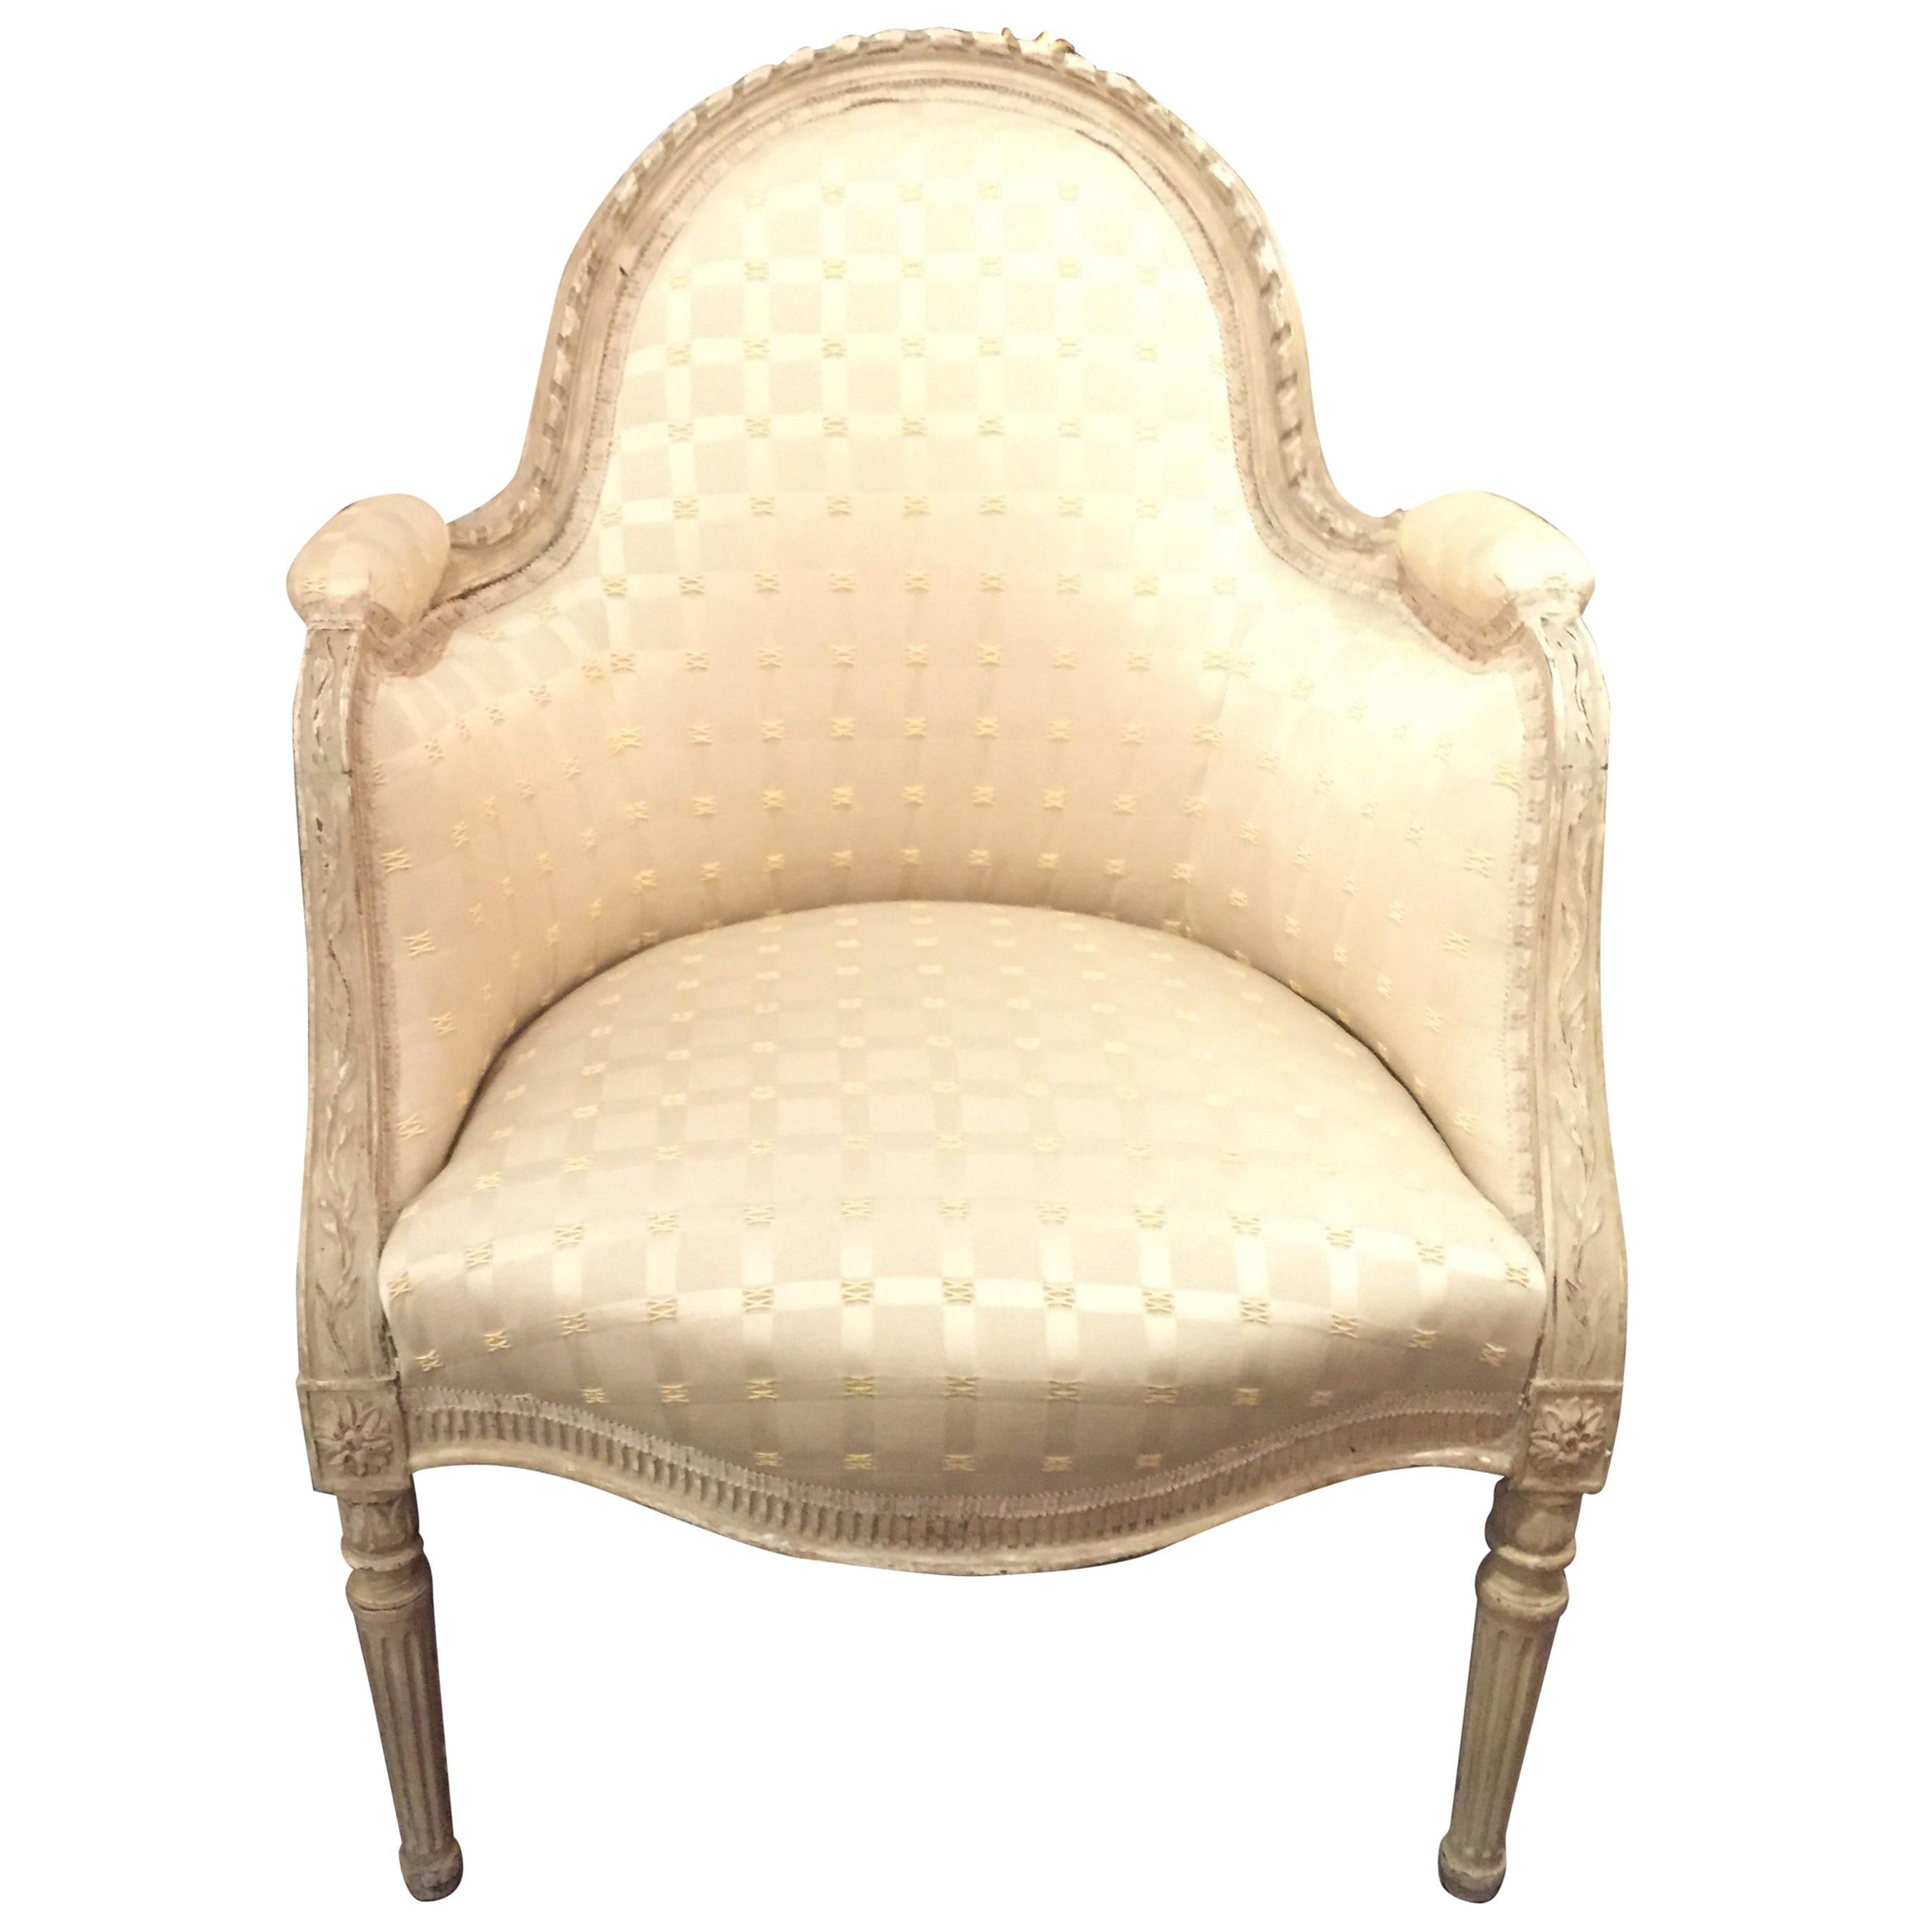 Late 19th Century French Louis XVI Berger’s Chair